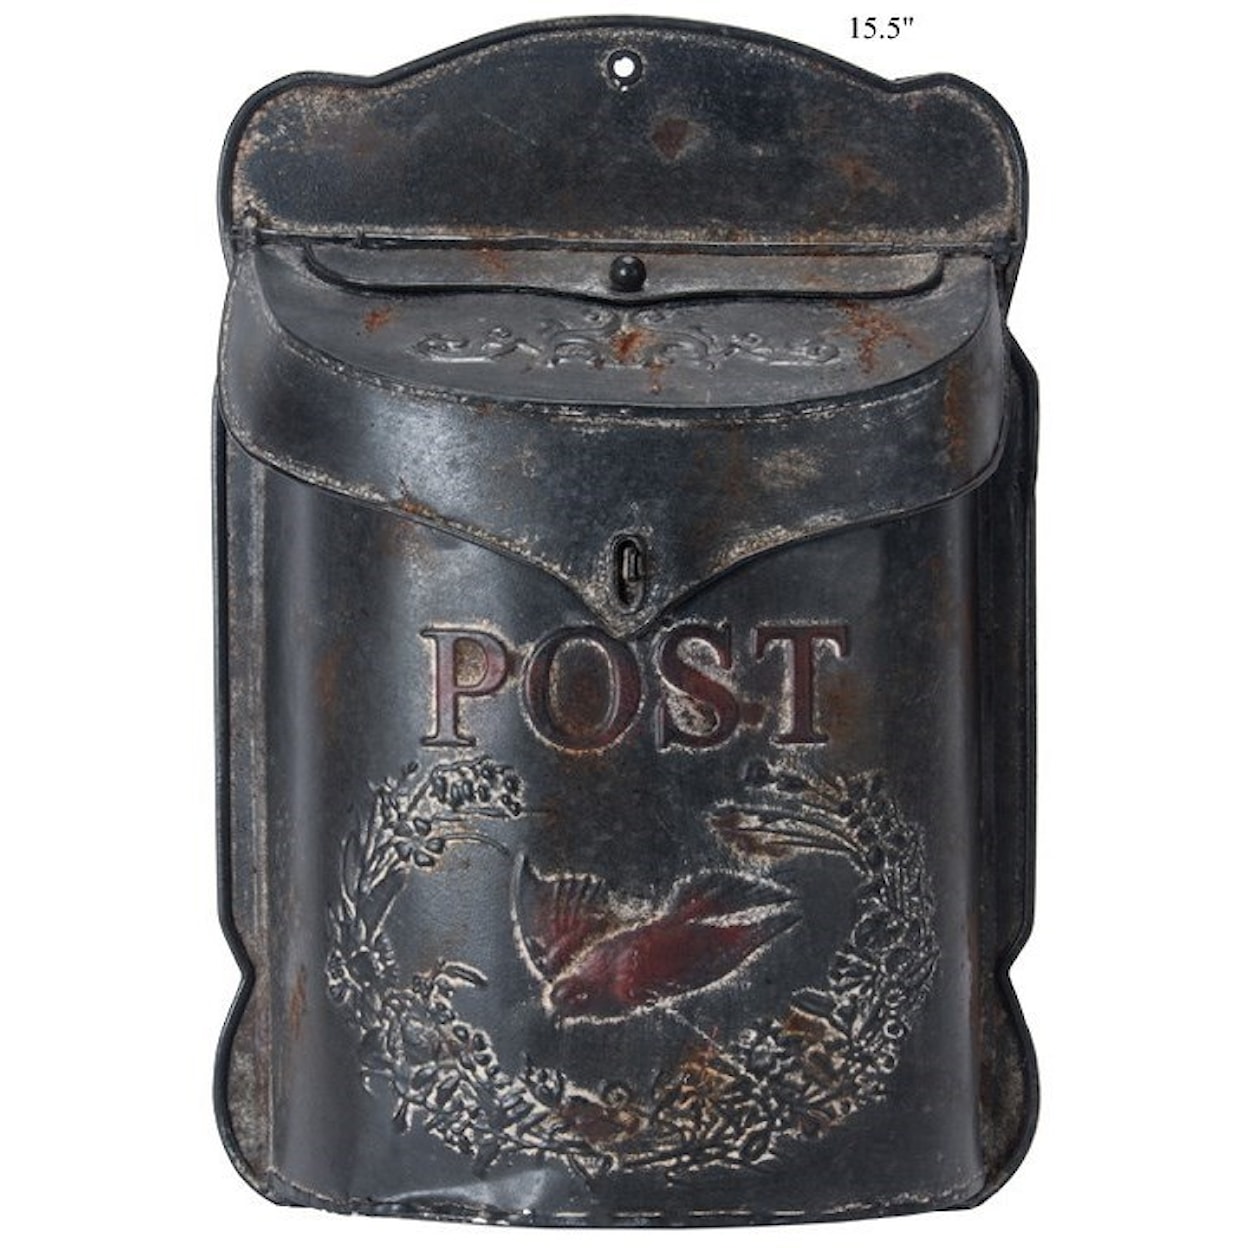 Will's Company Accents Vintage 'Post' Hanging Mailbox - 15.5"